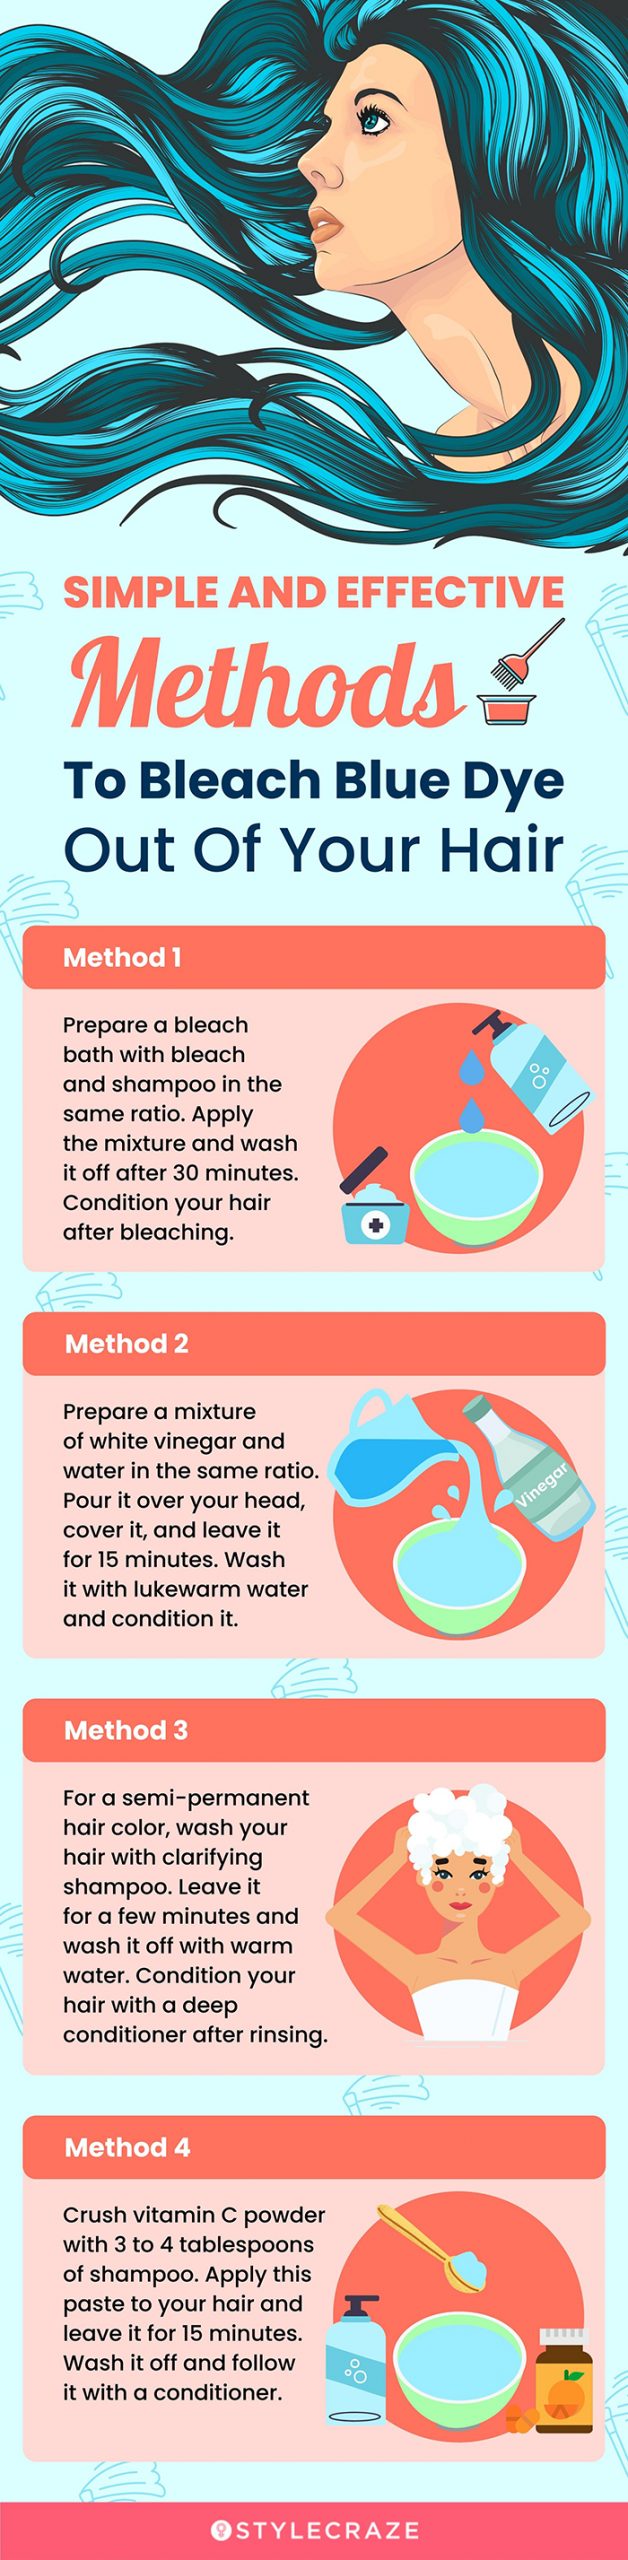 simple and effective methods to bleach blue dye out of your hair (infographic)